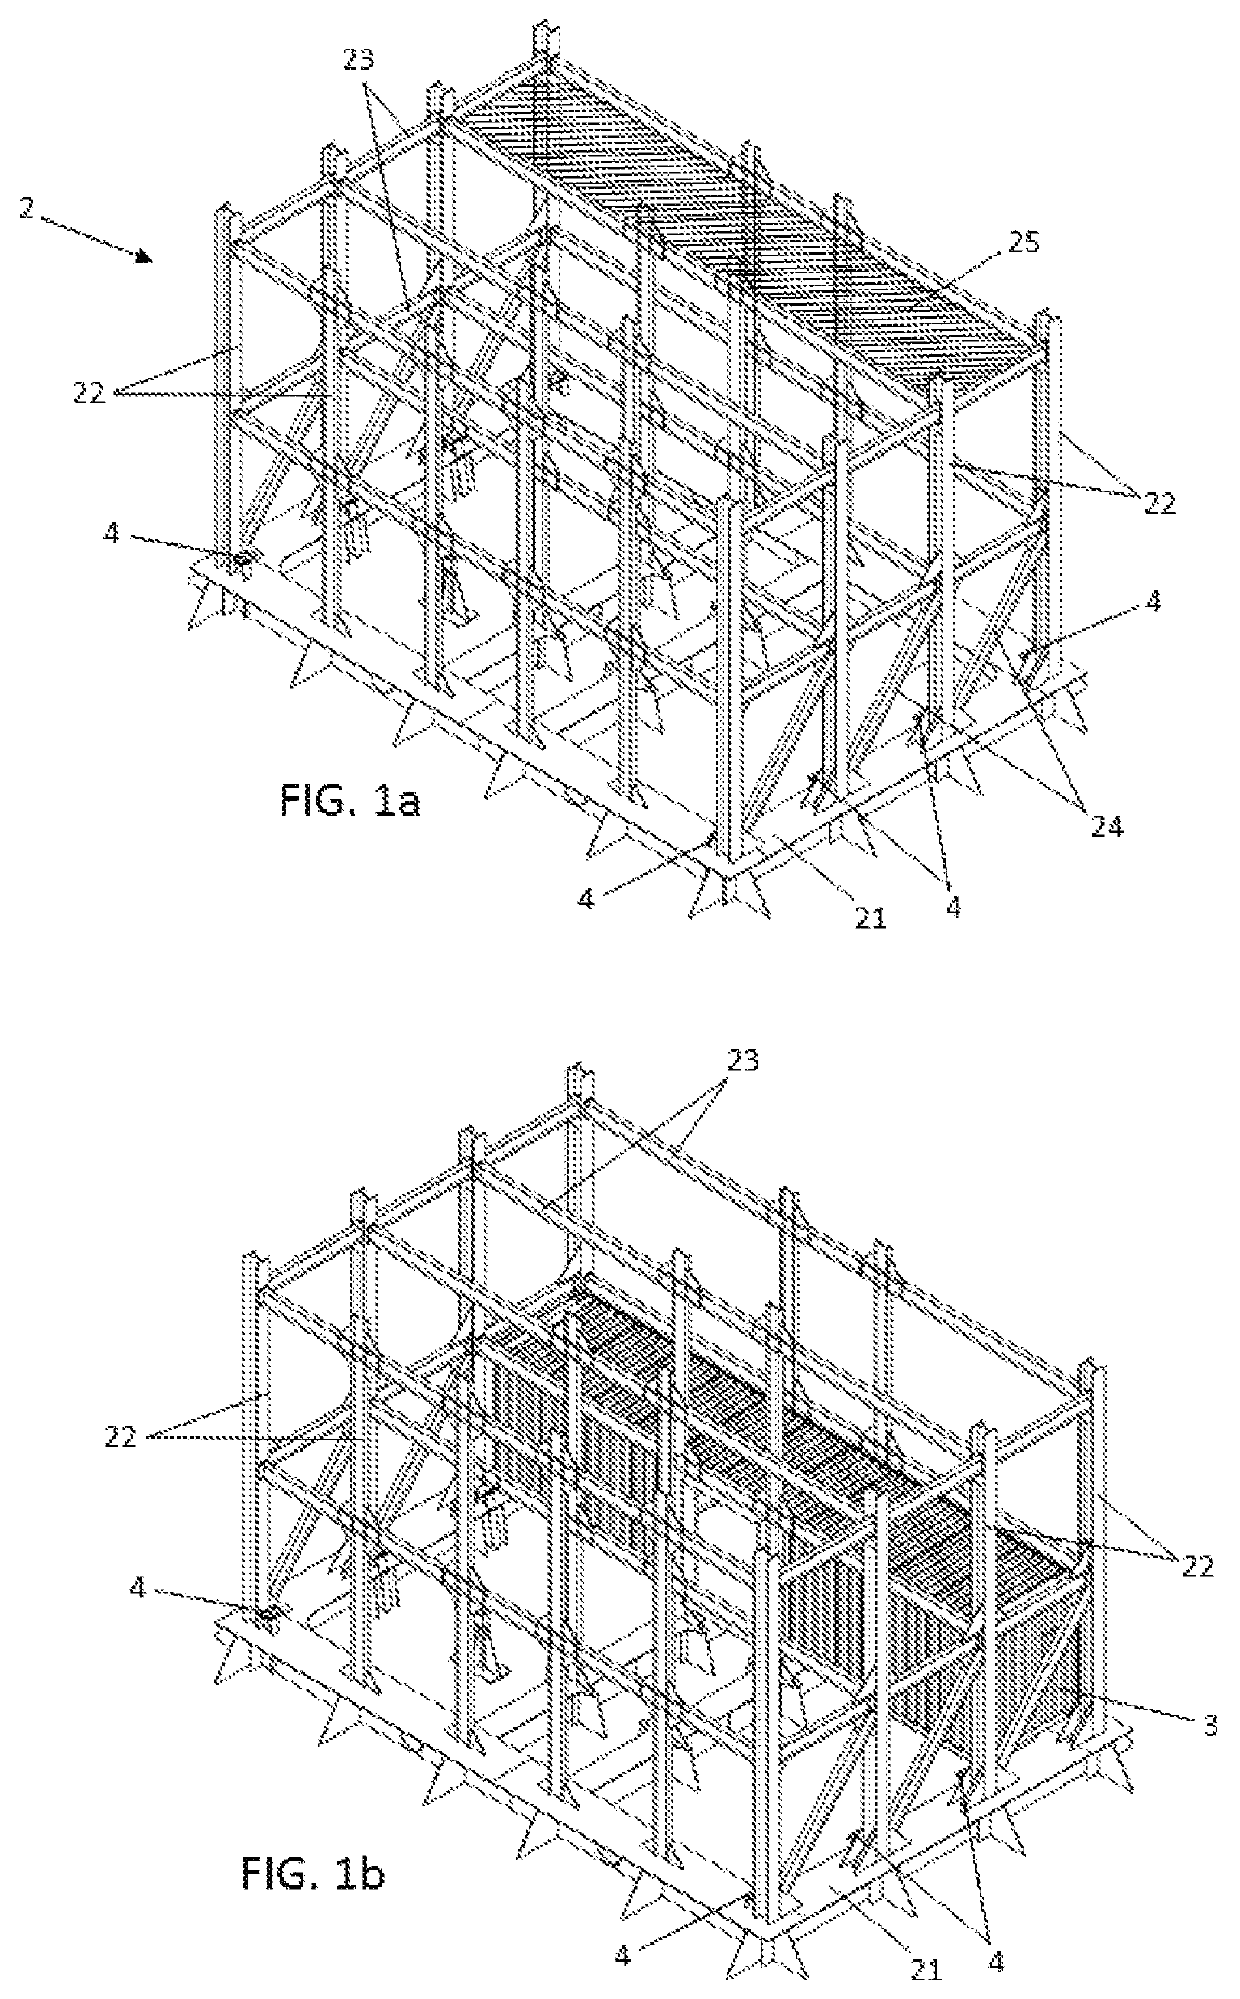 System and method for constructing habitable installations for floating structures